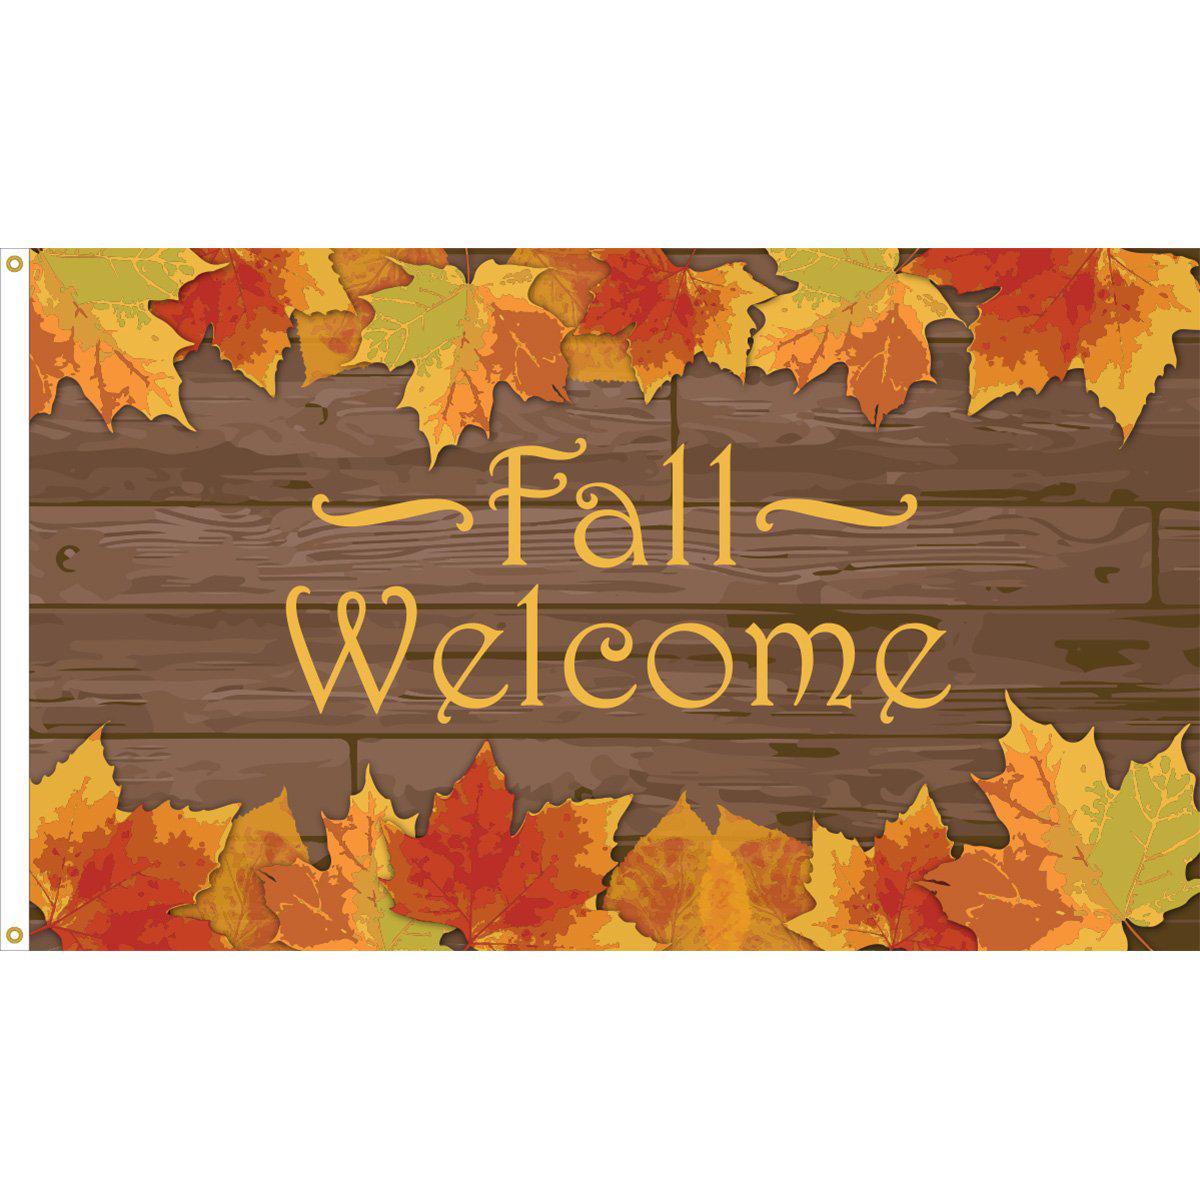 Fall Welcome 3' x 5' Flag with leaves and wood background for Autumn